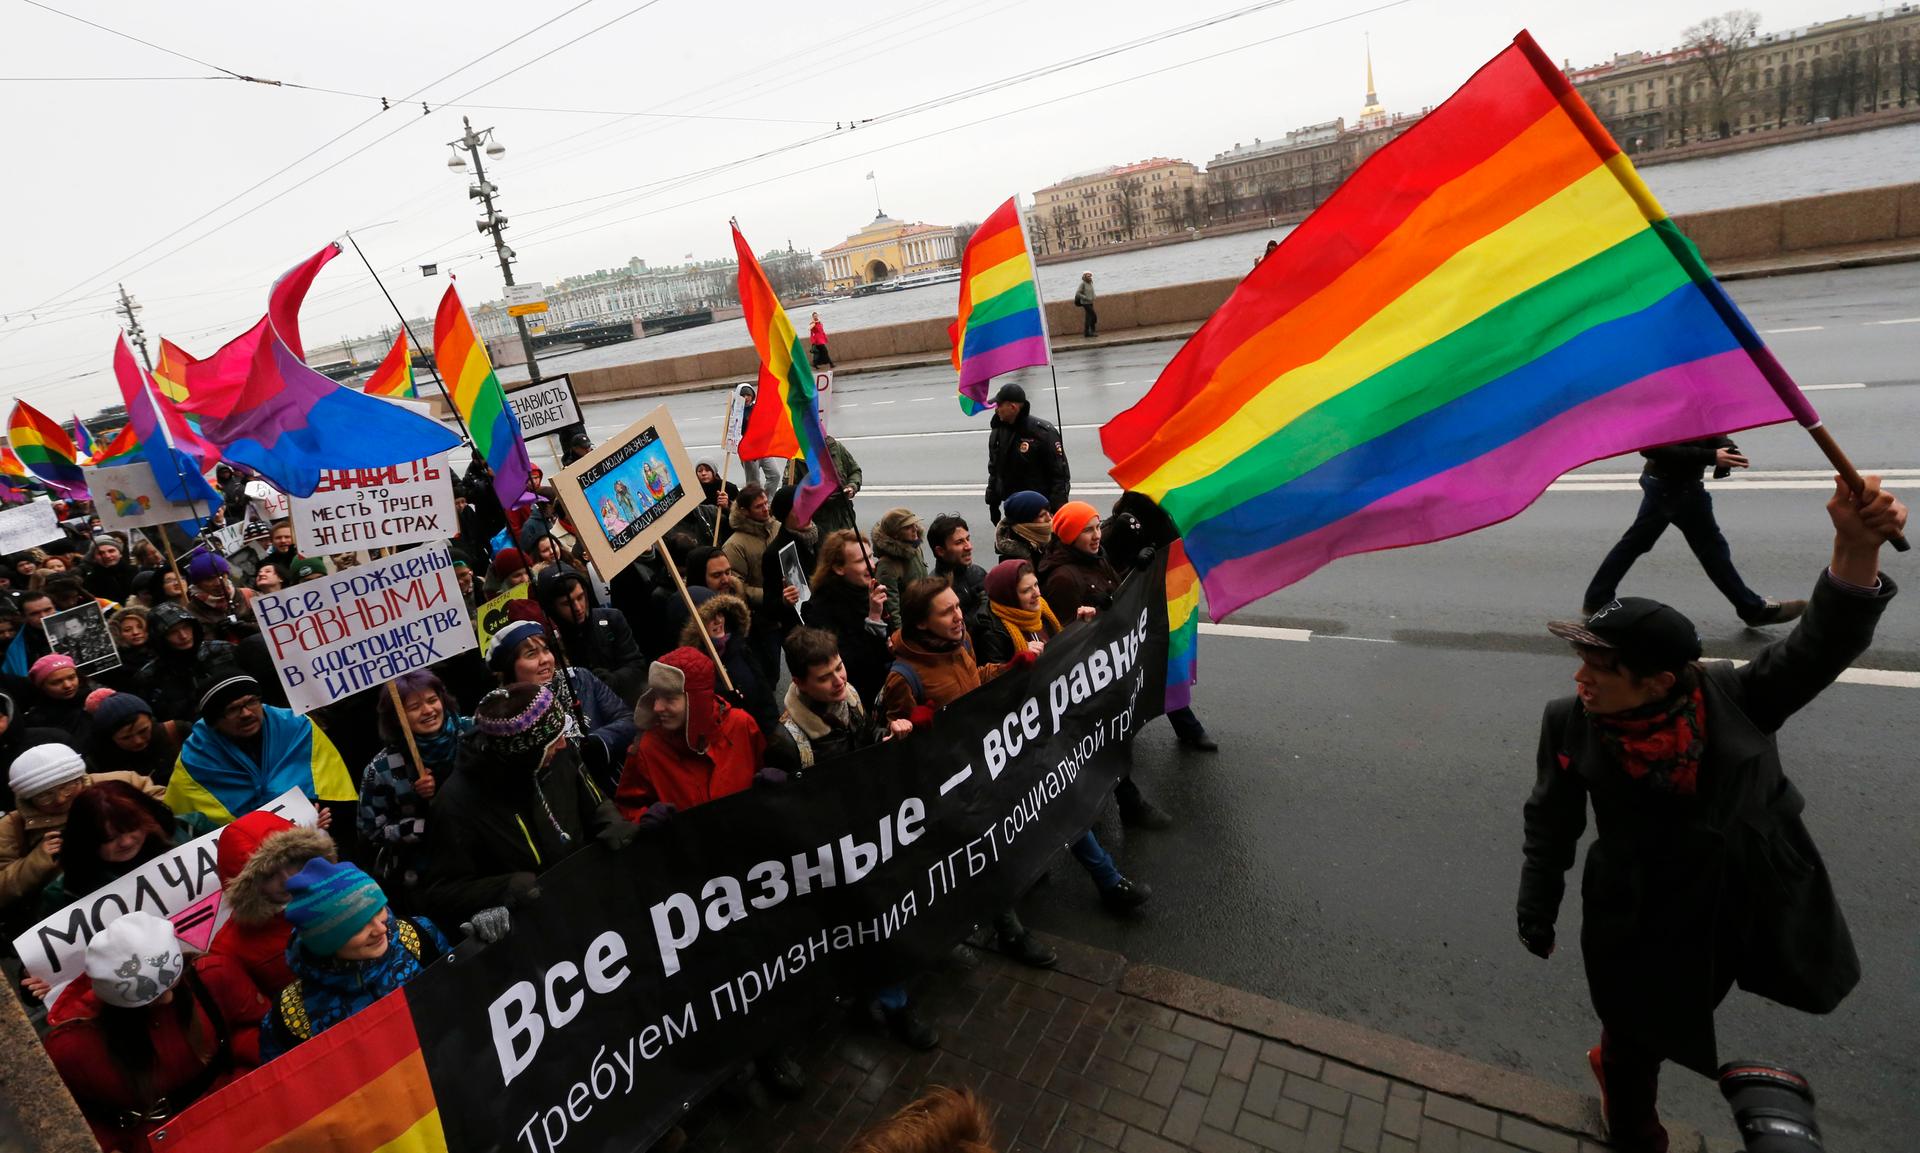 St.Petersburg, RussiaGay activists take part in a protest event called "March against Hatred" in St. Petersburg November 2, 2014. The activists are marching in opposition towards the aggressive Russian government policy due to the war in Ukraine. (RUSSIA 